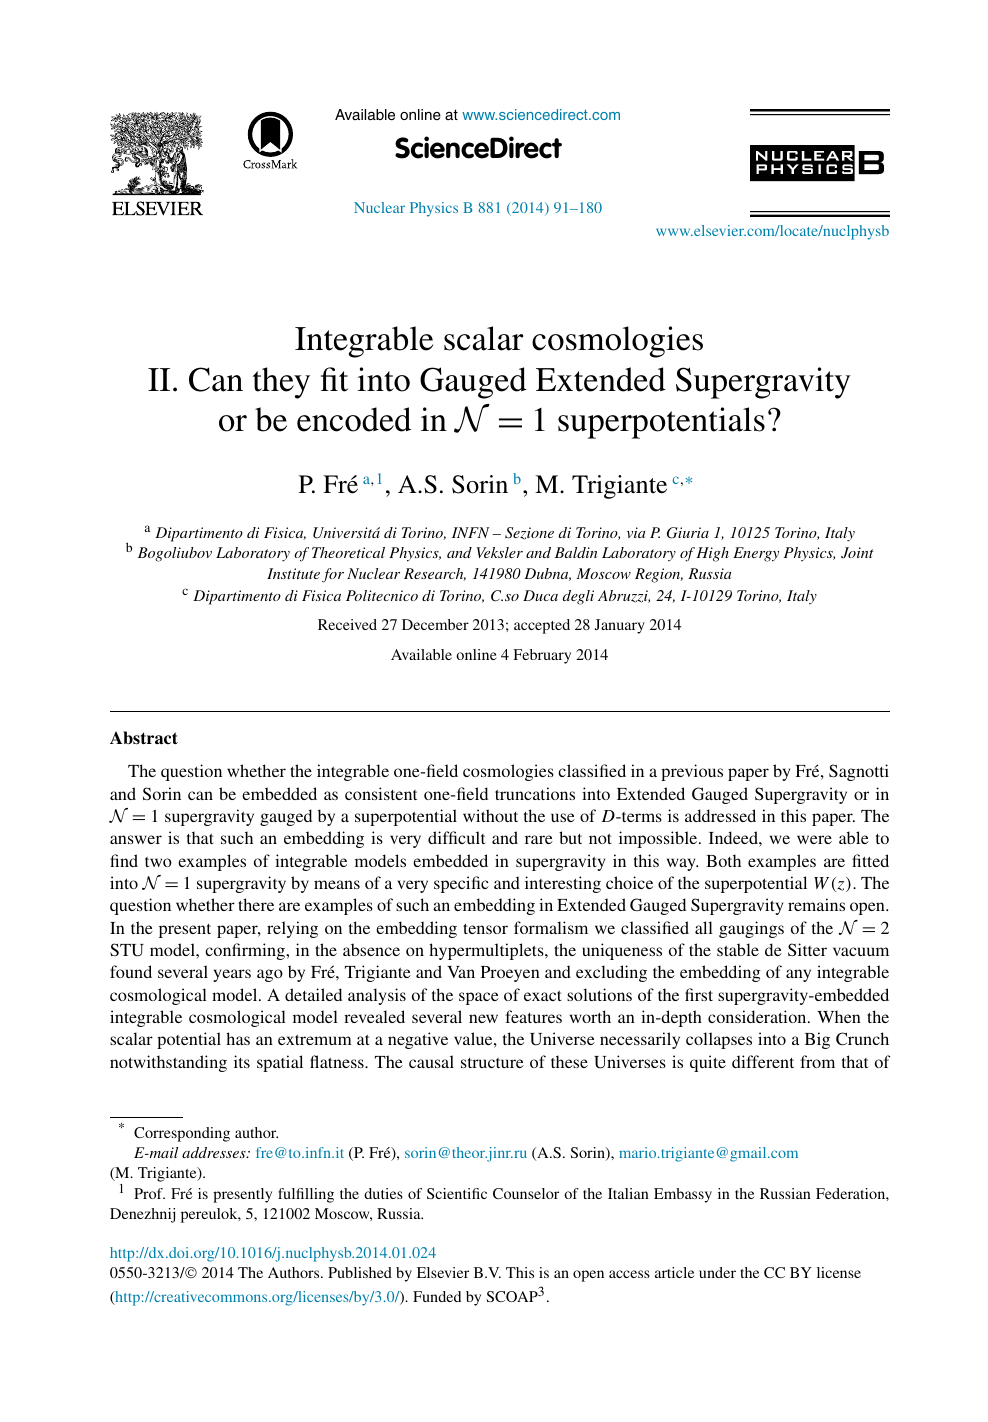 Integrable Scalar Cosmologies Topic Of Research Paper In Physical Sciences Download Scholarly Article Pdf And Read For Free On Cyberleninka Open Science Hub